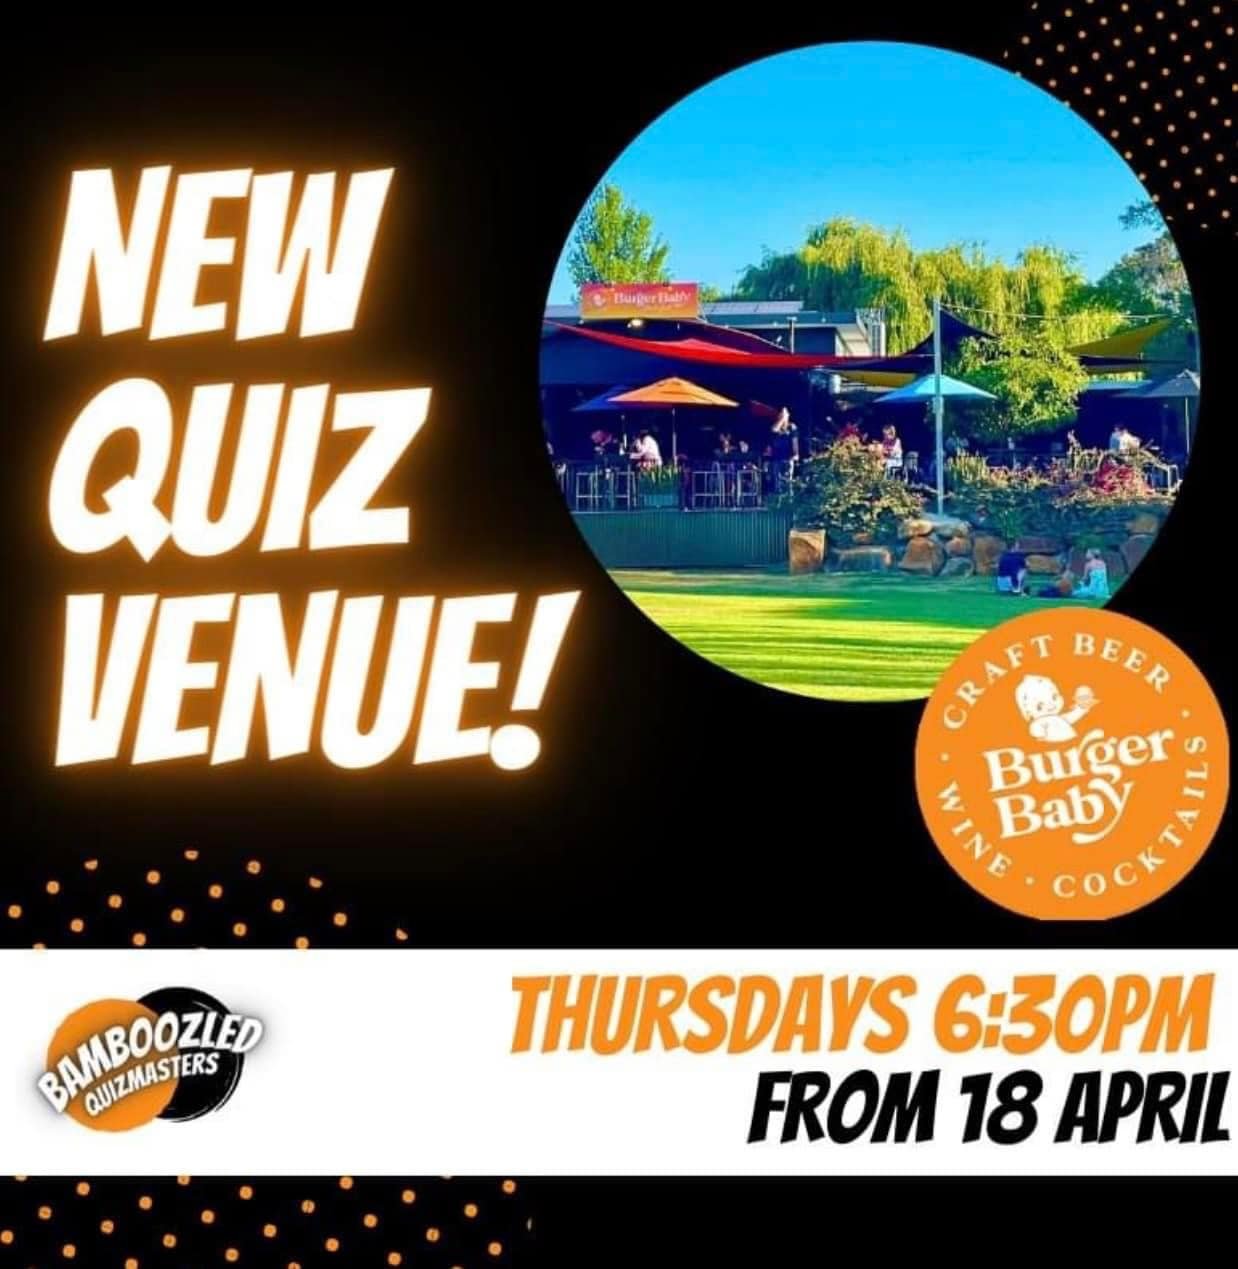 This Thursday and every Thursday from 6:30pm see you this week for more fun from Bamboozled Quizmasters Burger BabyMargaret RiverDoust's Corner book your table now!